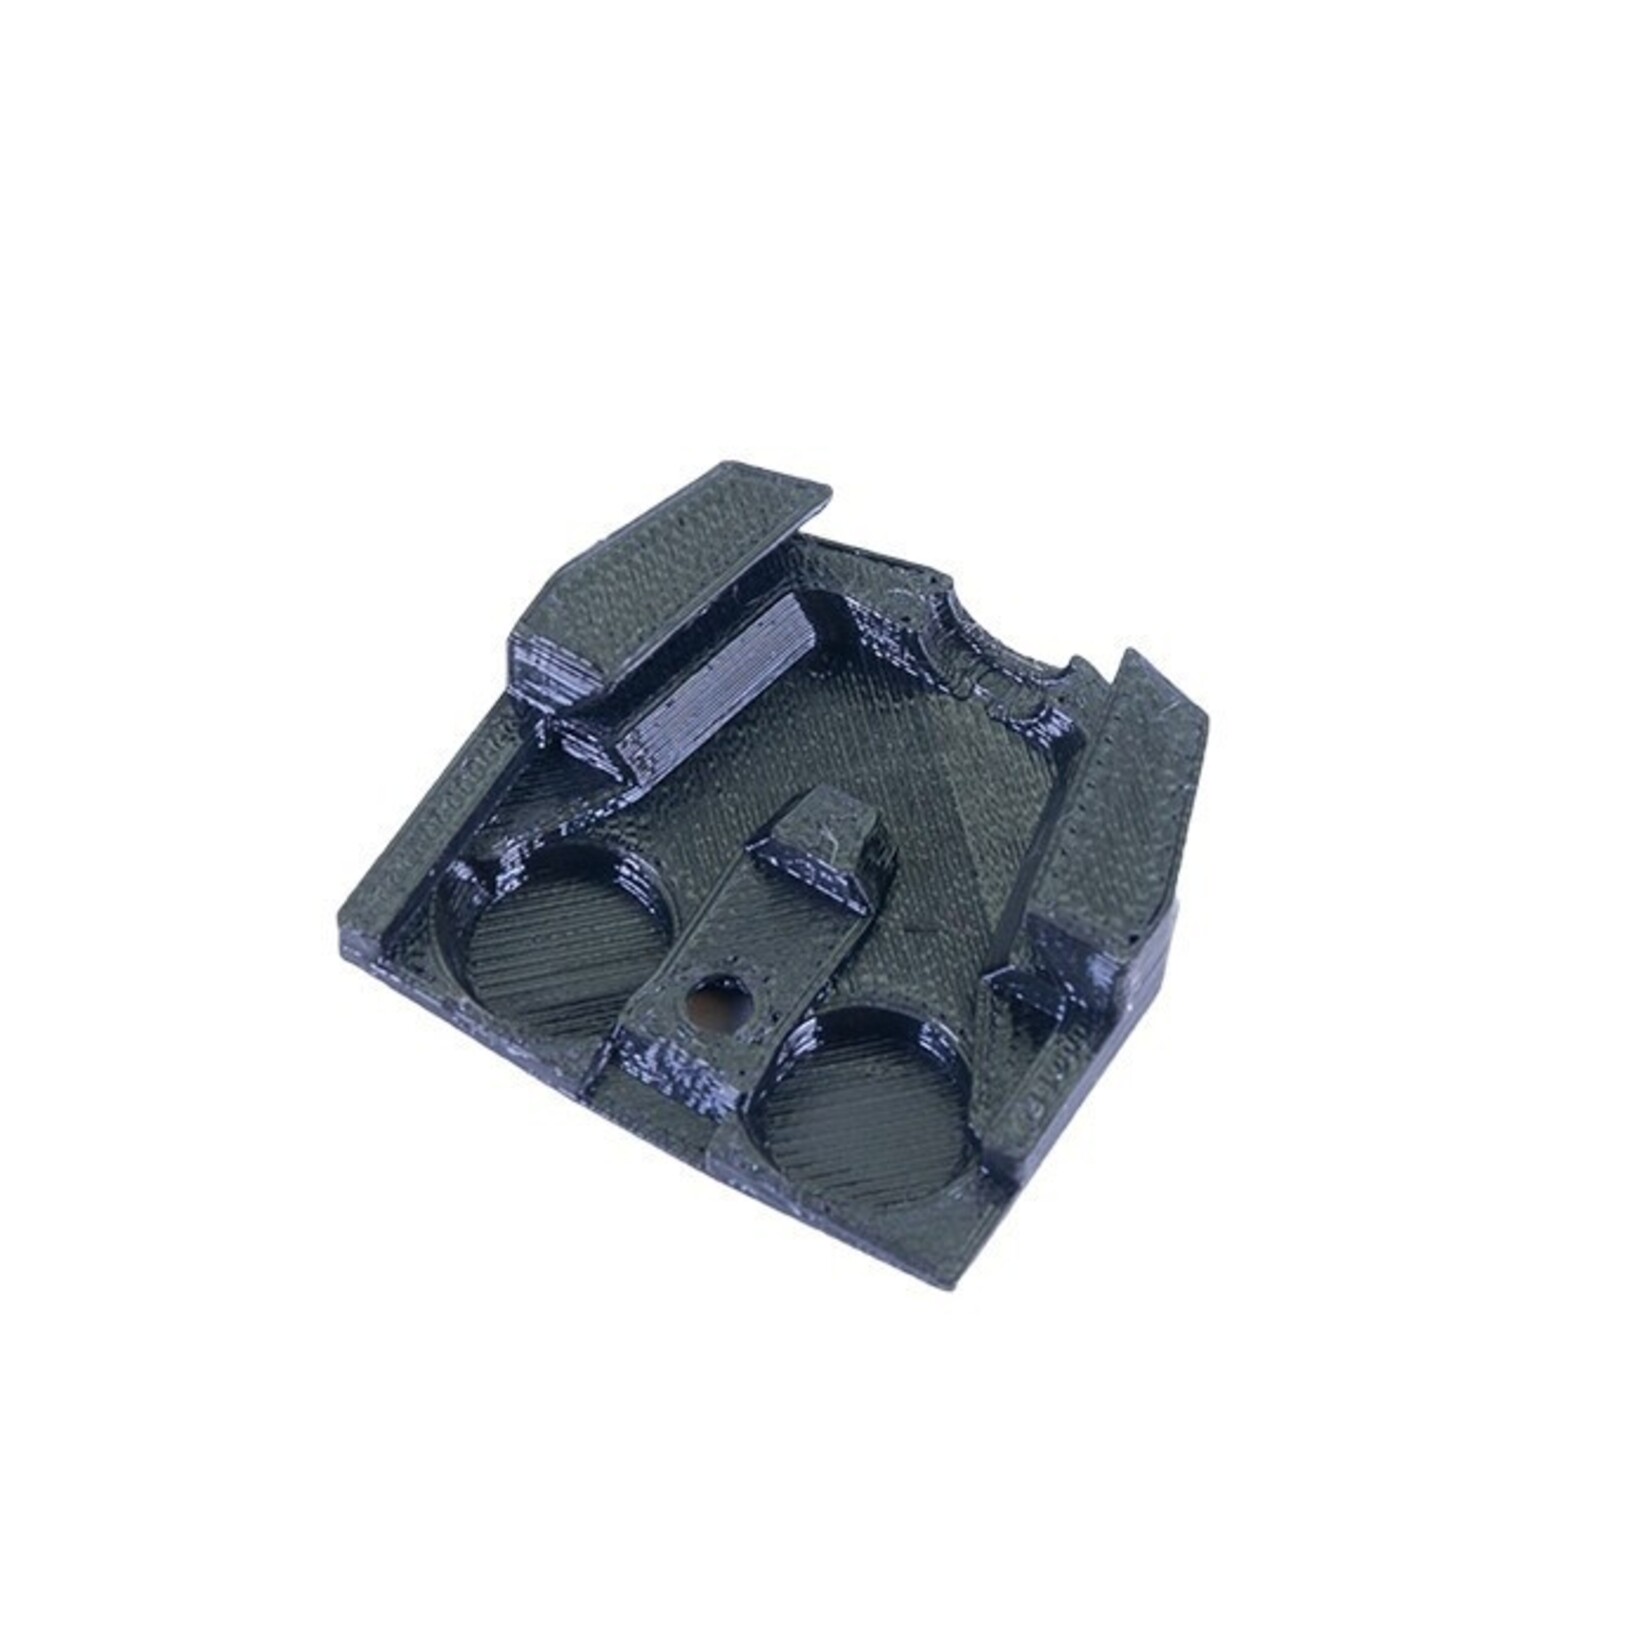 Prusa Research MINI HEATBED CABLE COVER TOP